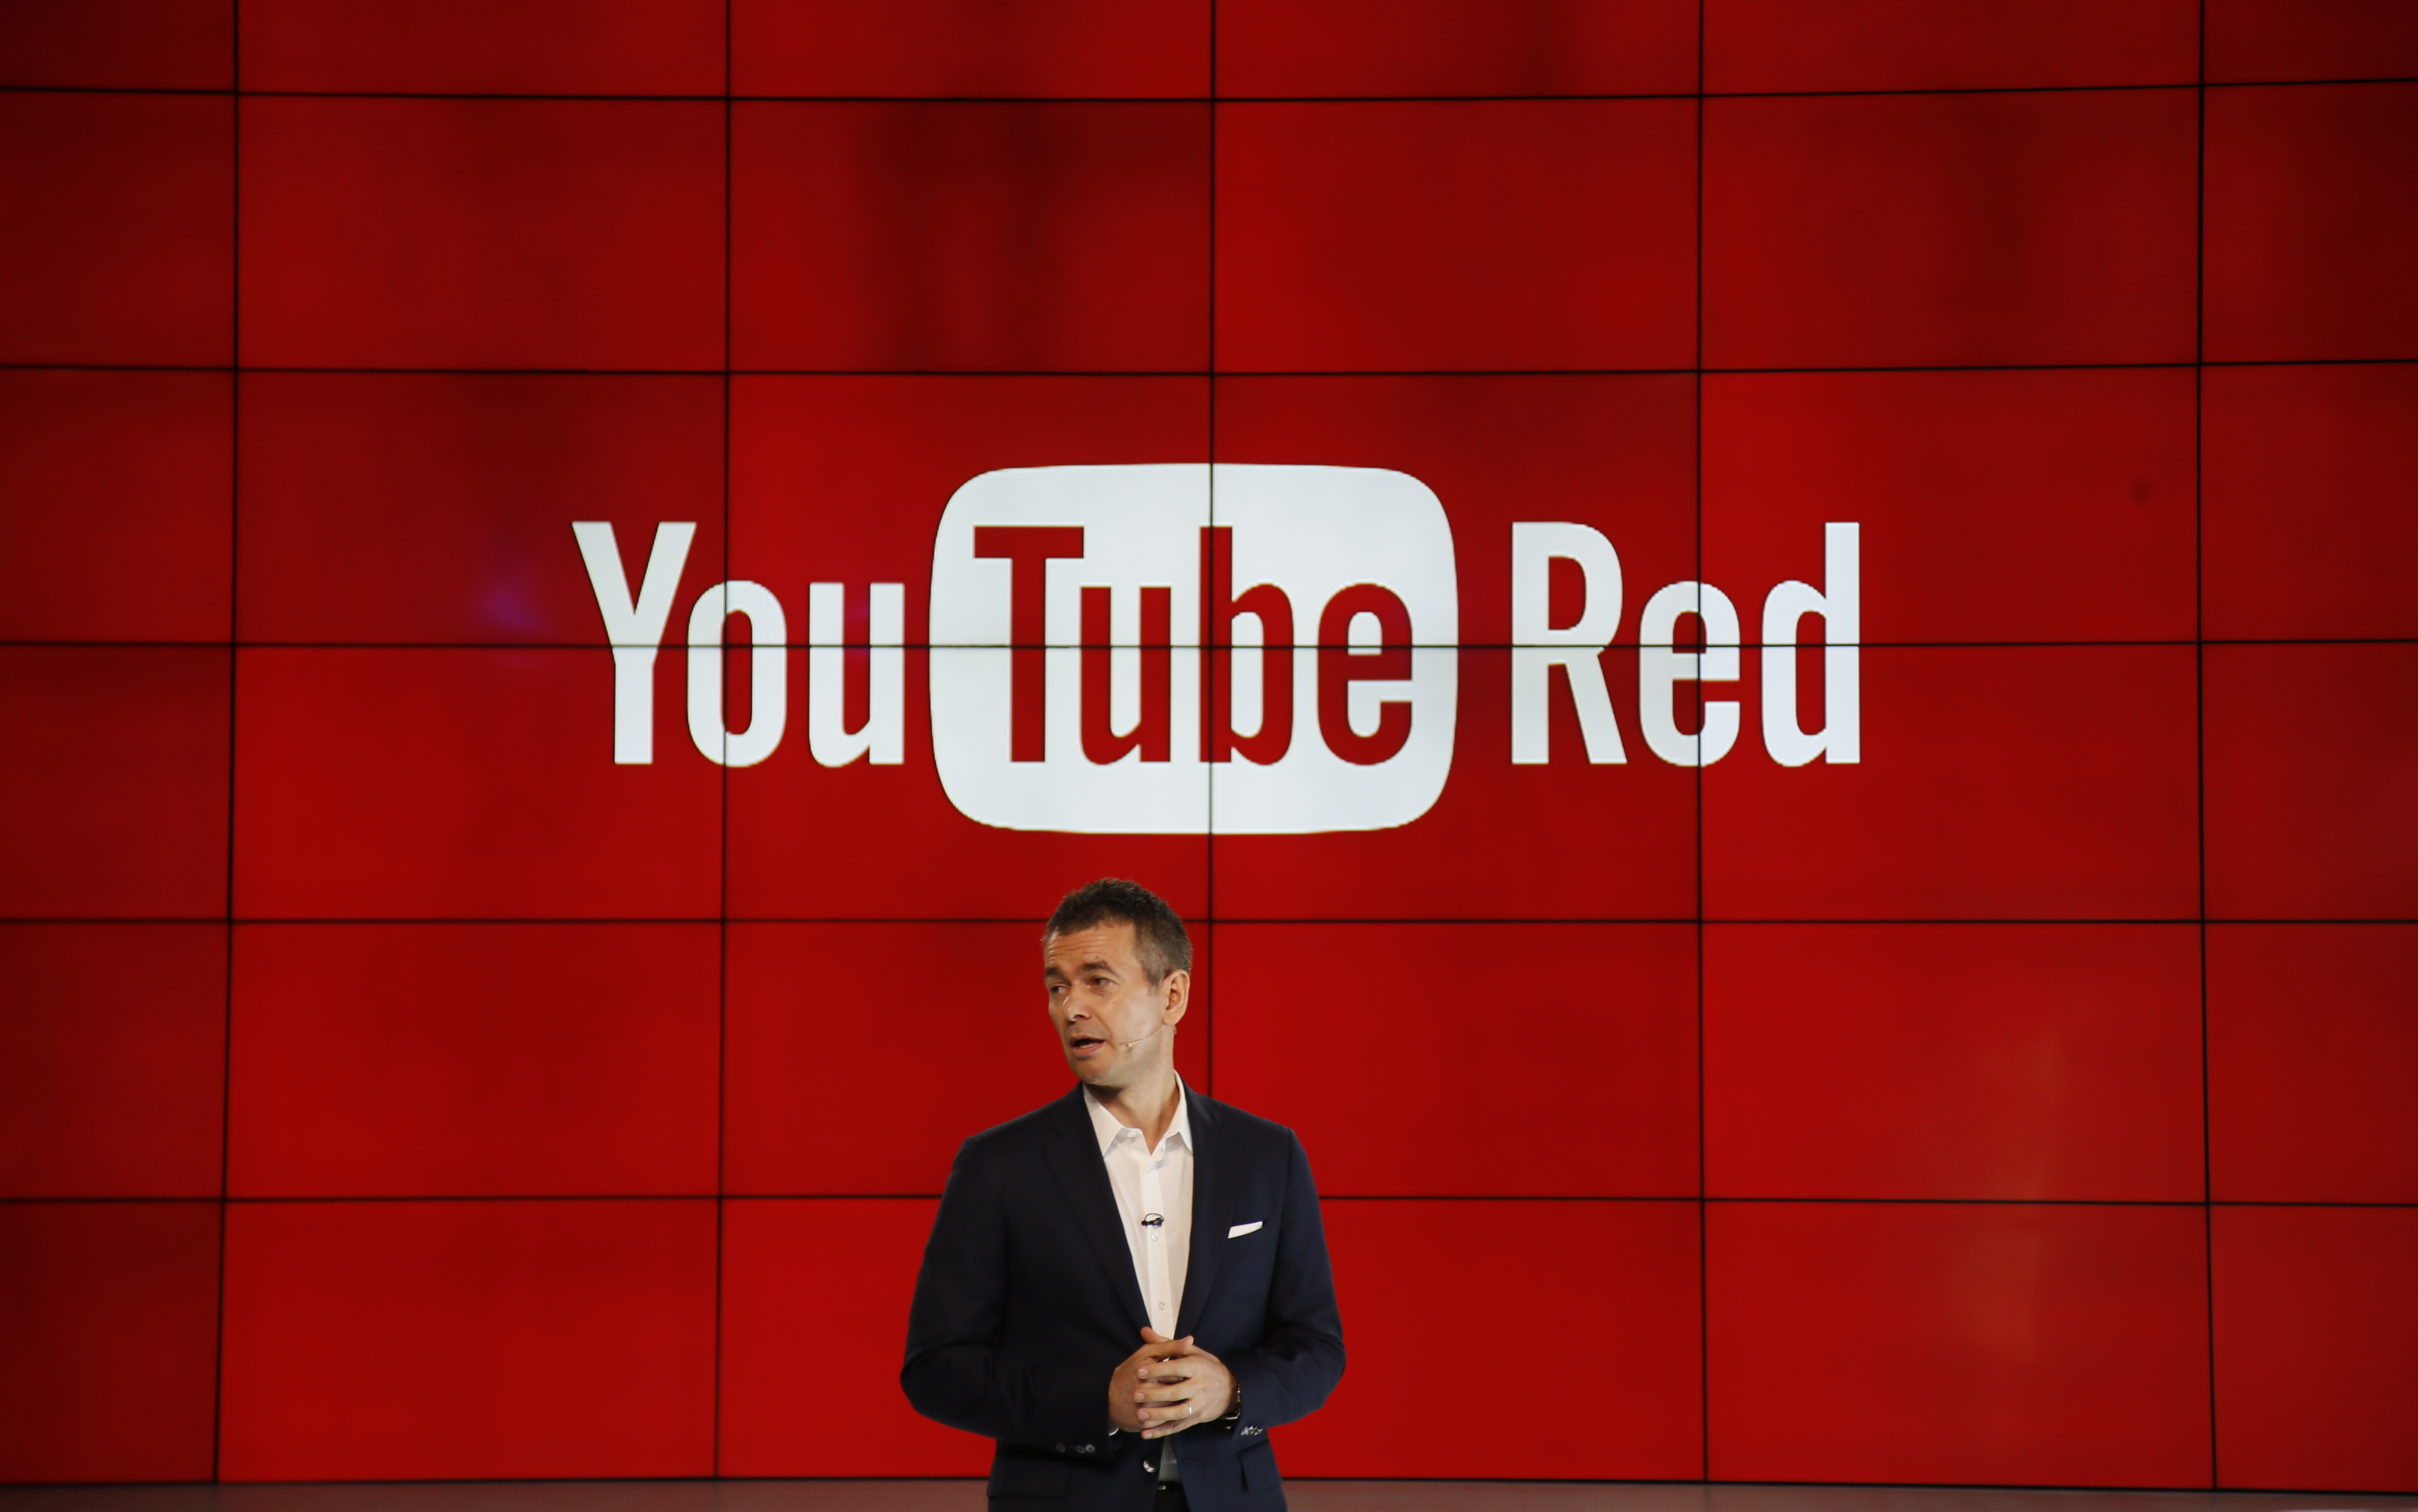 Robert Kyncl, YouTube Chief Business Officer, speaks as YouTube unveils "YouTube Red," a new subscription service, at YouTube Space LA offices Wednesday, Oct. 21, 2015, in Los Angeles. (AP Photo/Danny Moloshok)